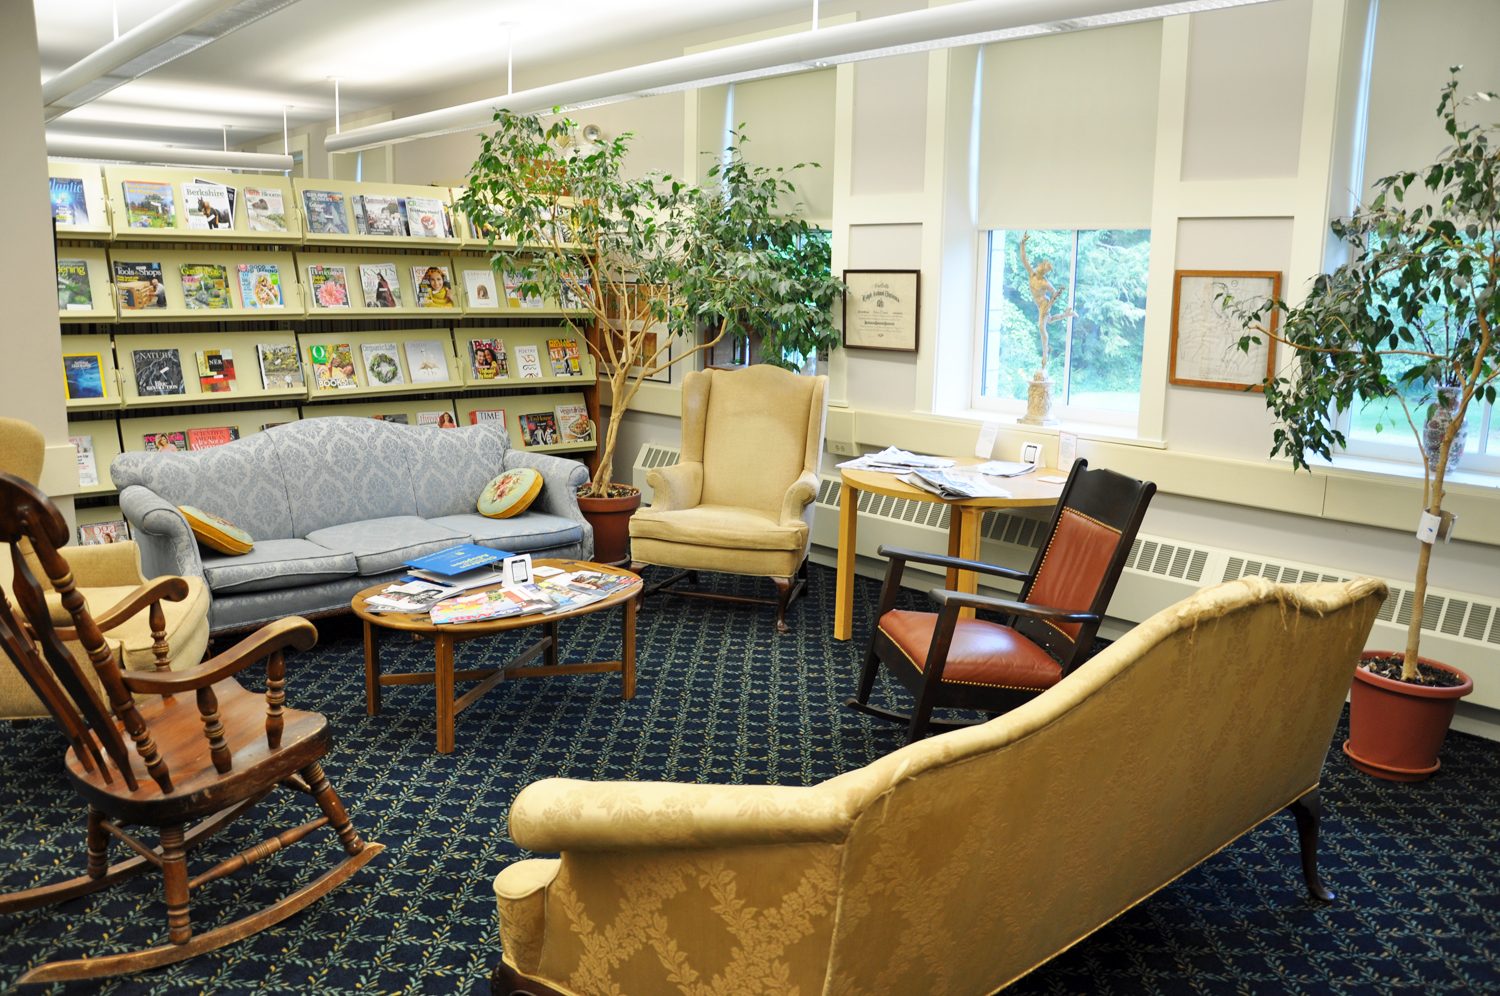 SEATING FOR READING IN PERIODICALS